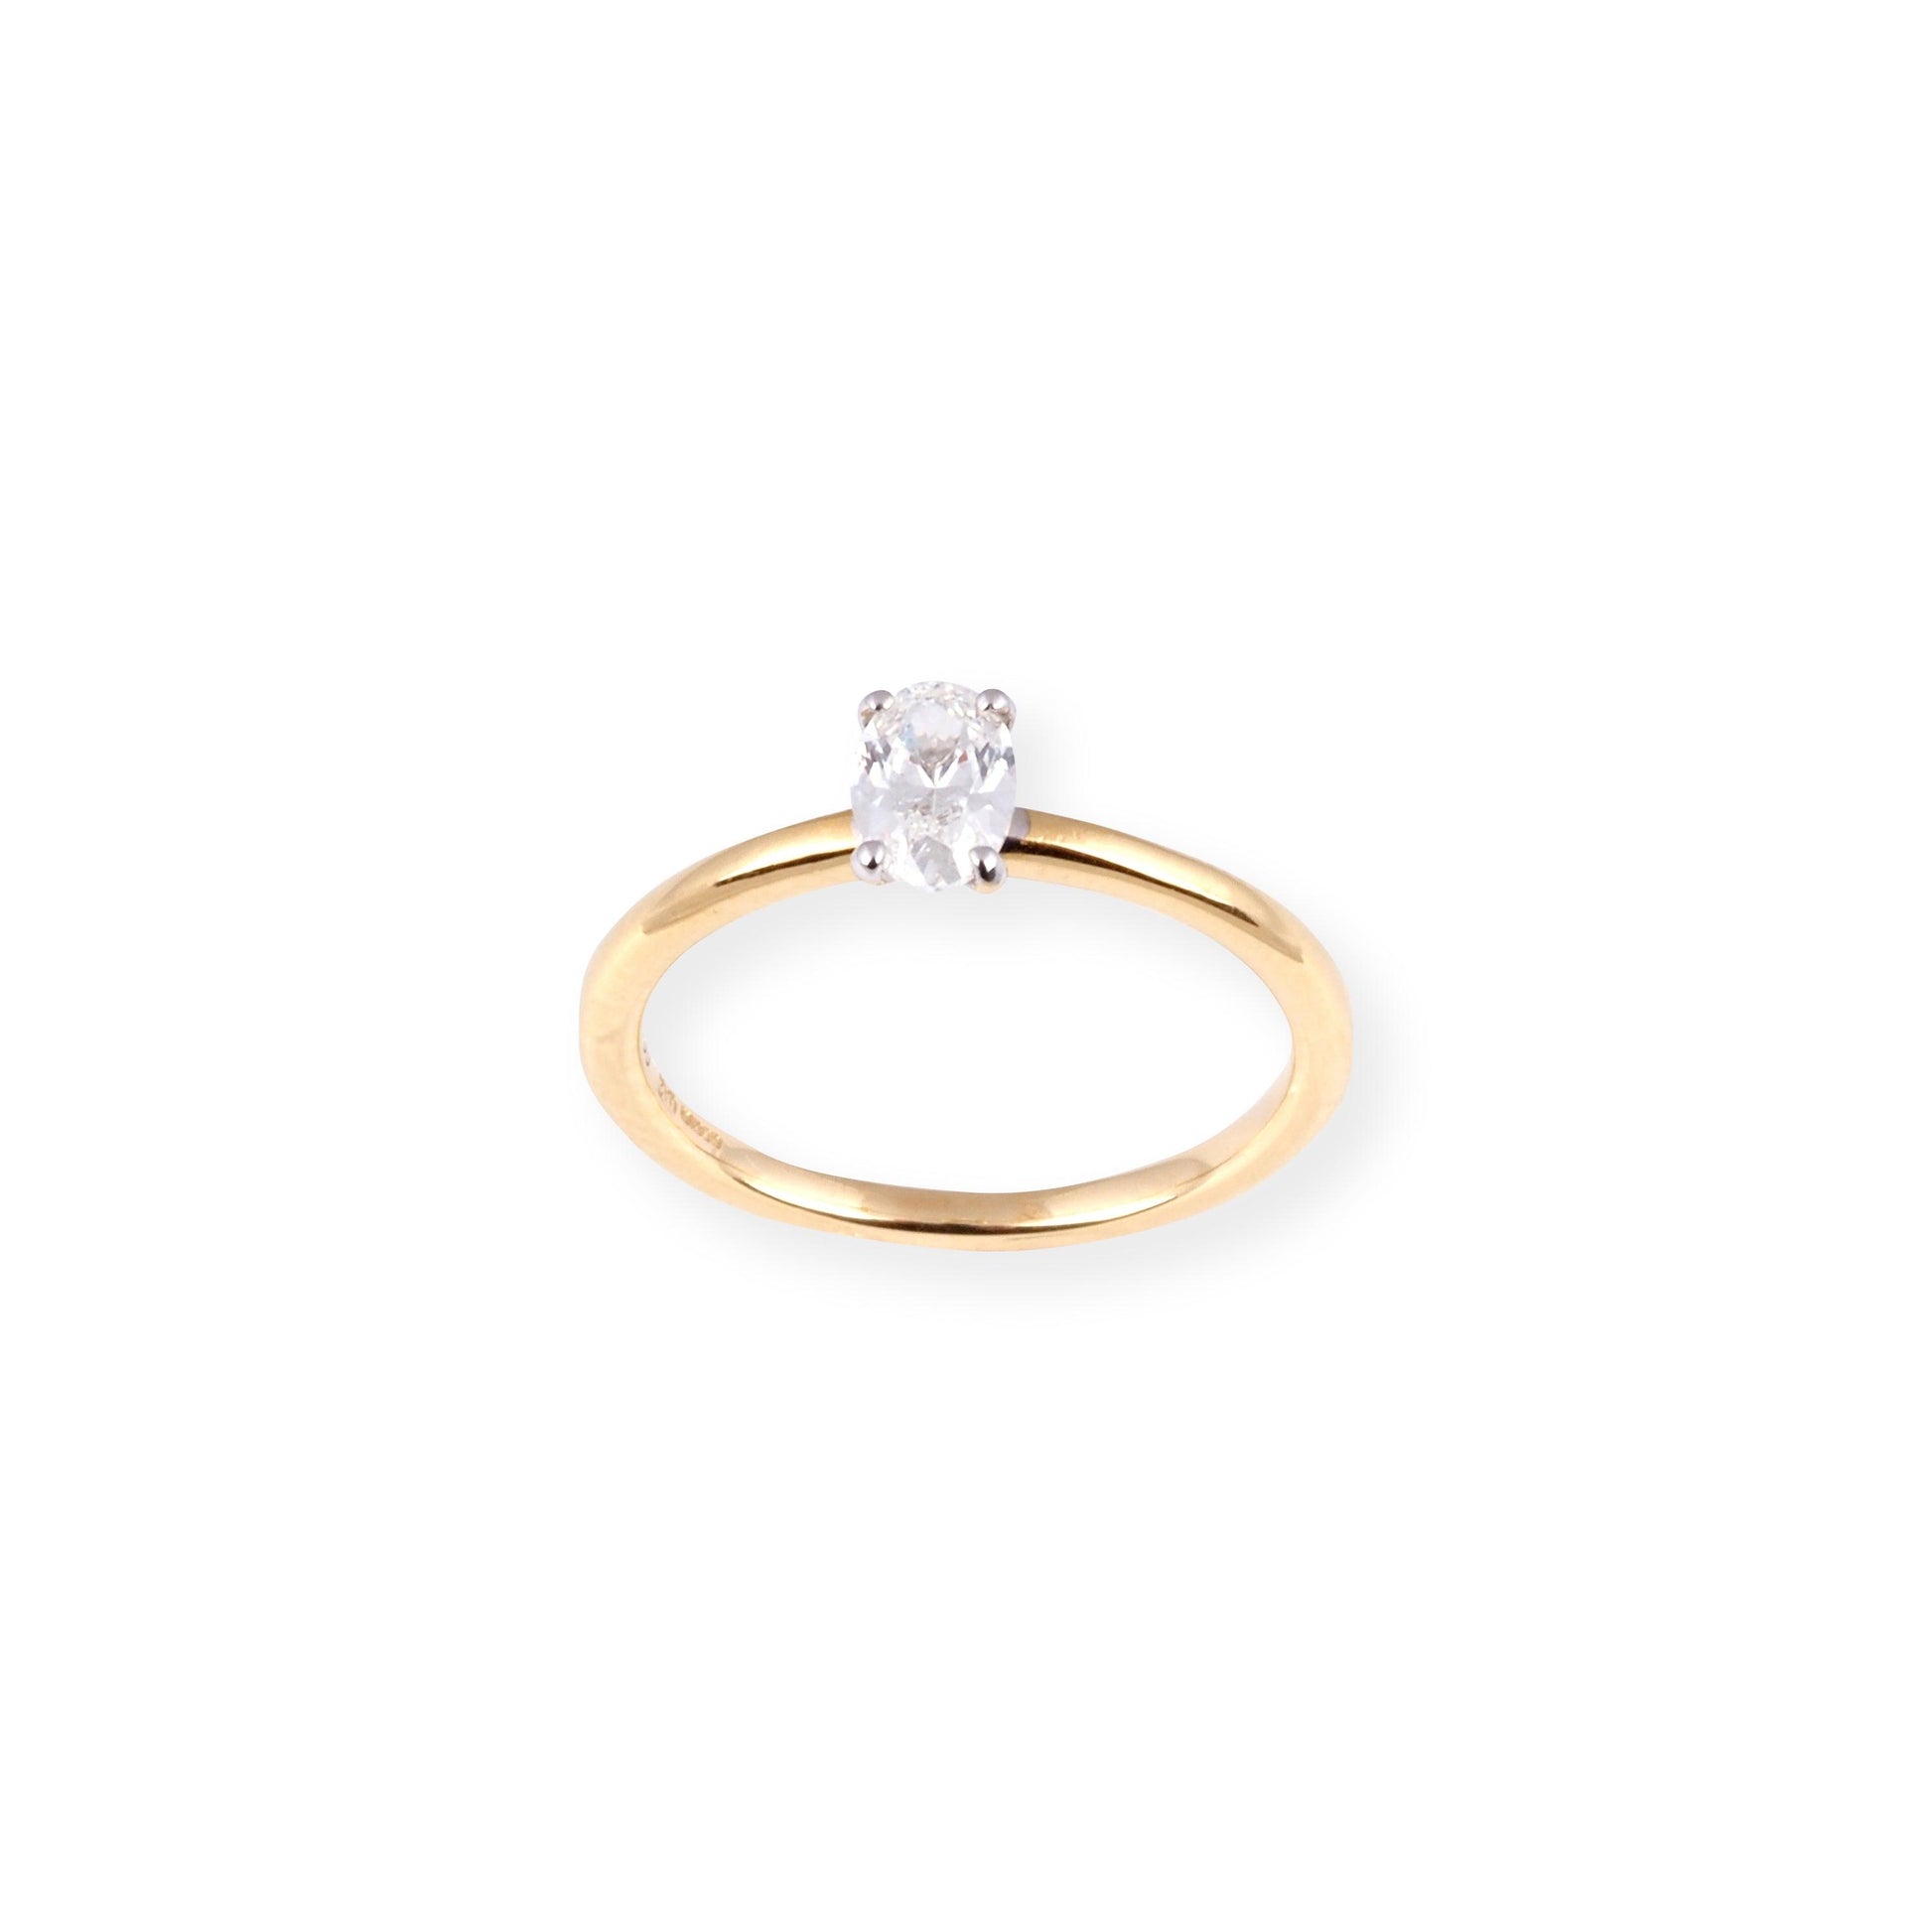 18ct Yellow Gold Solitaire Diamond Ring LR-1361 - Minar Jewellers